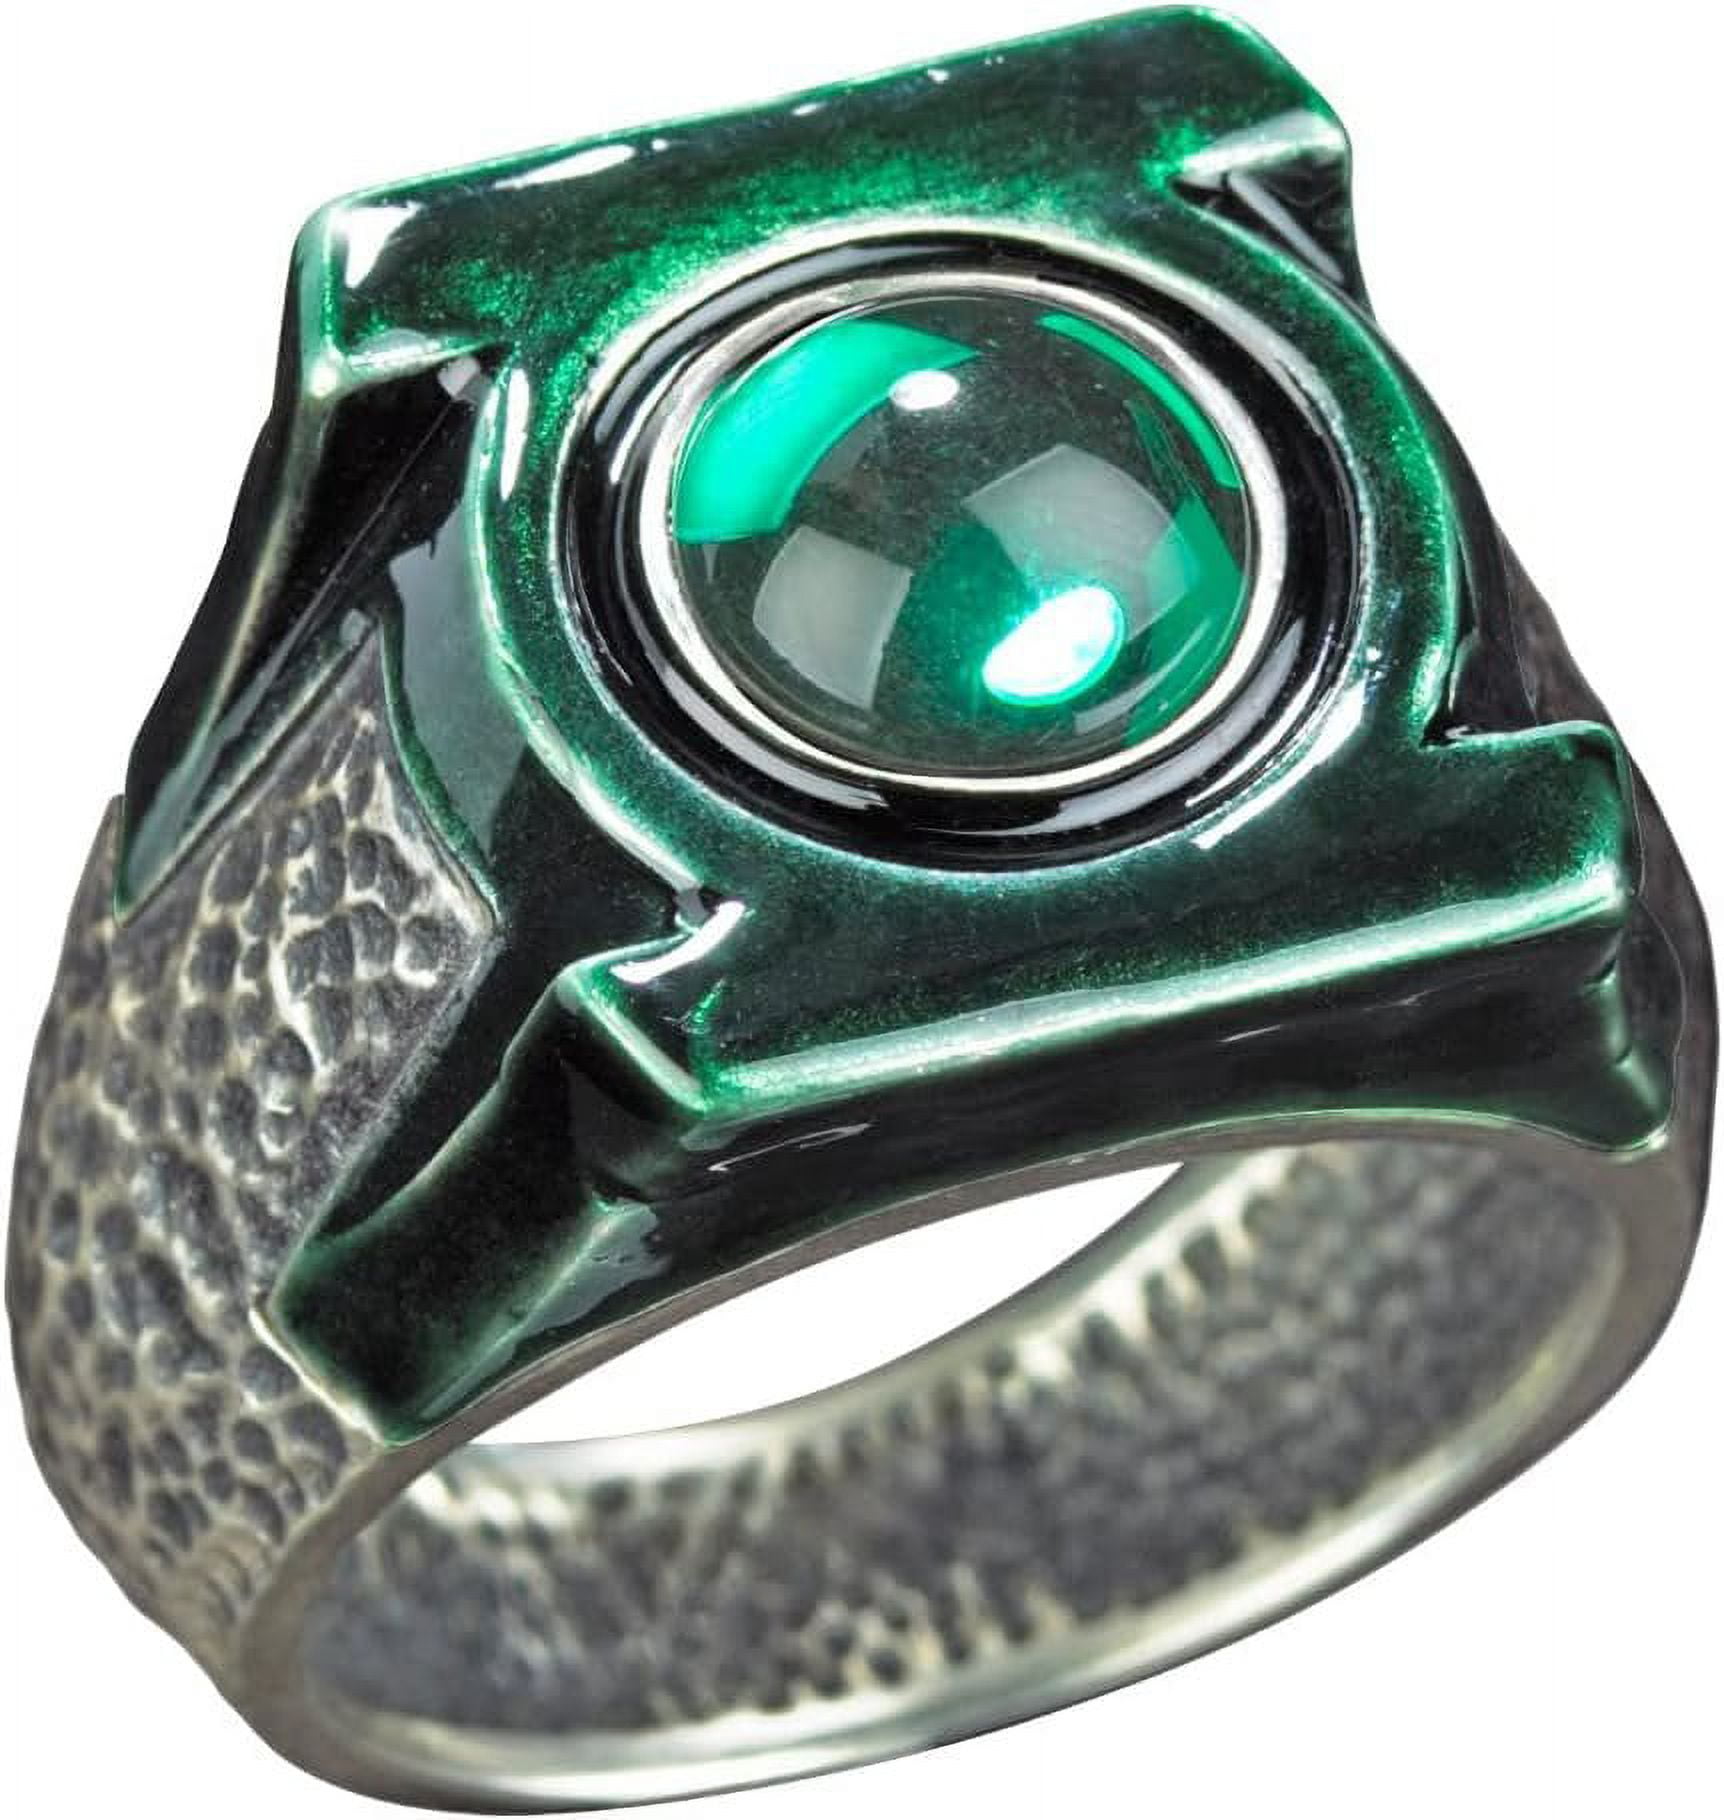 Question How were the lantern rings created? : r/Greenlantern